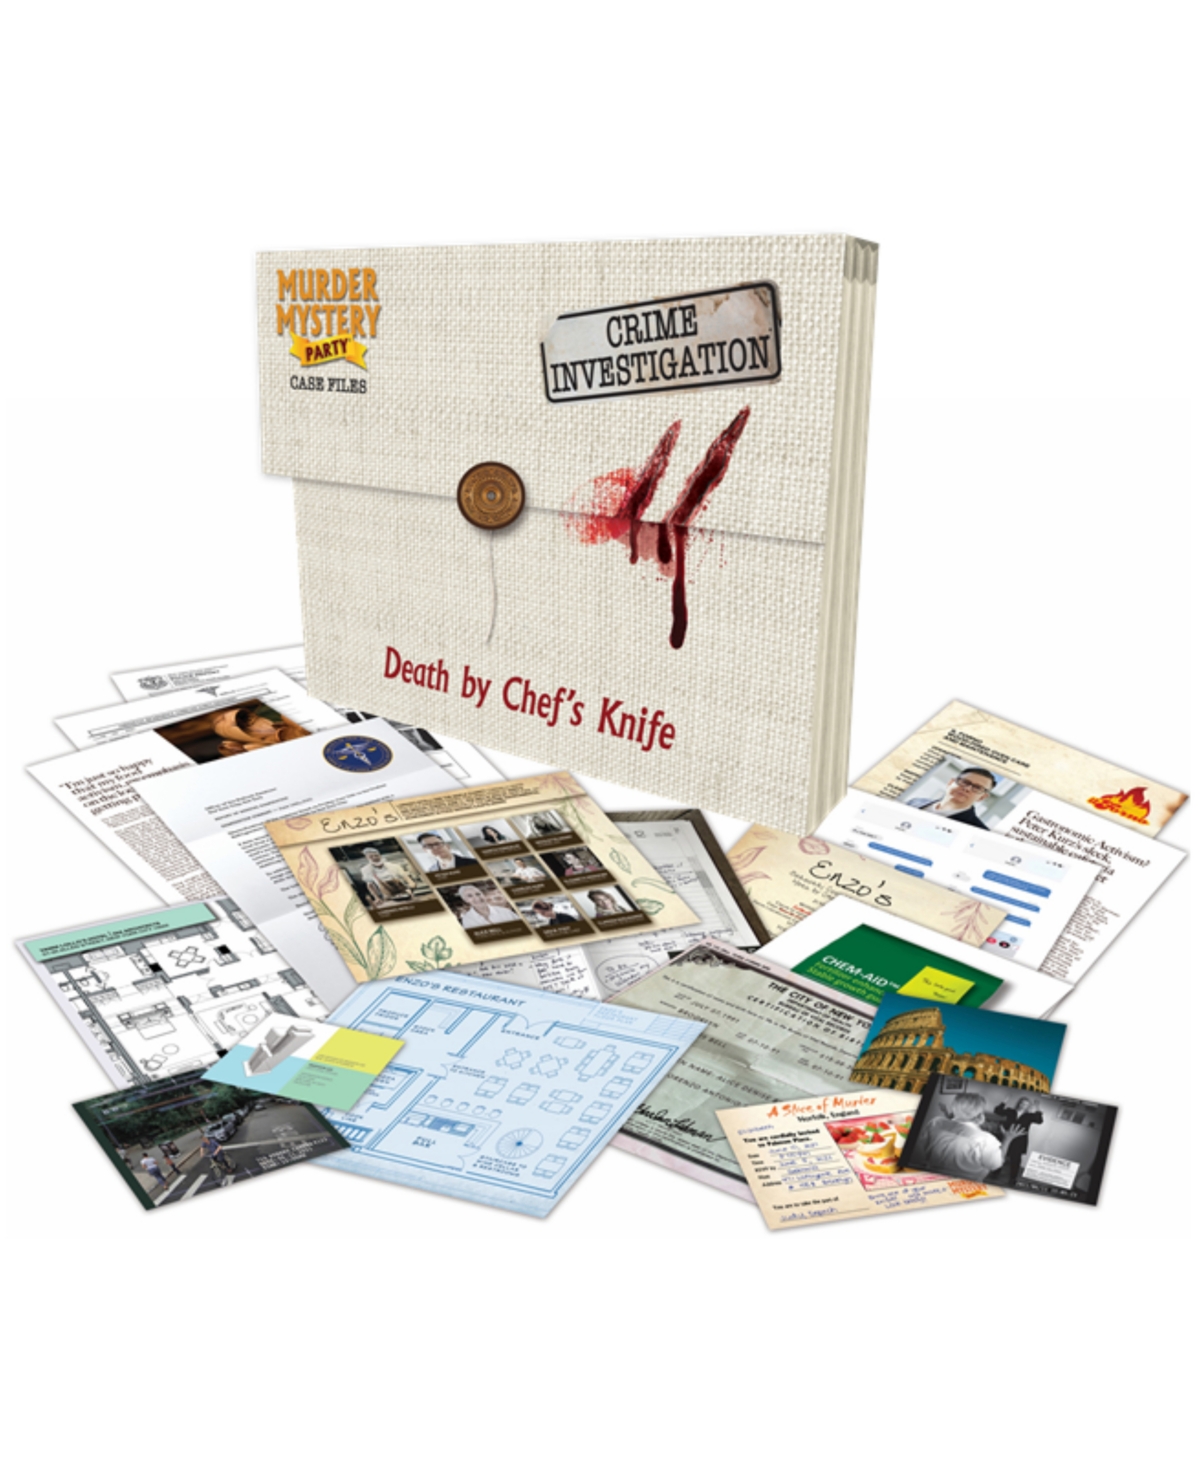 University Games Kids' Mystery Party Case Files In Multi